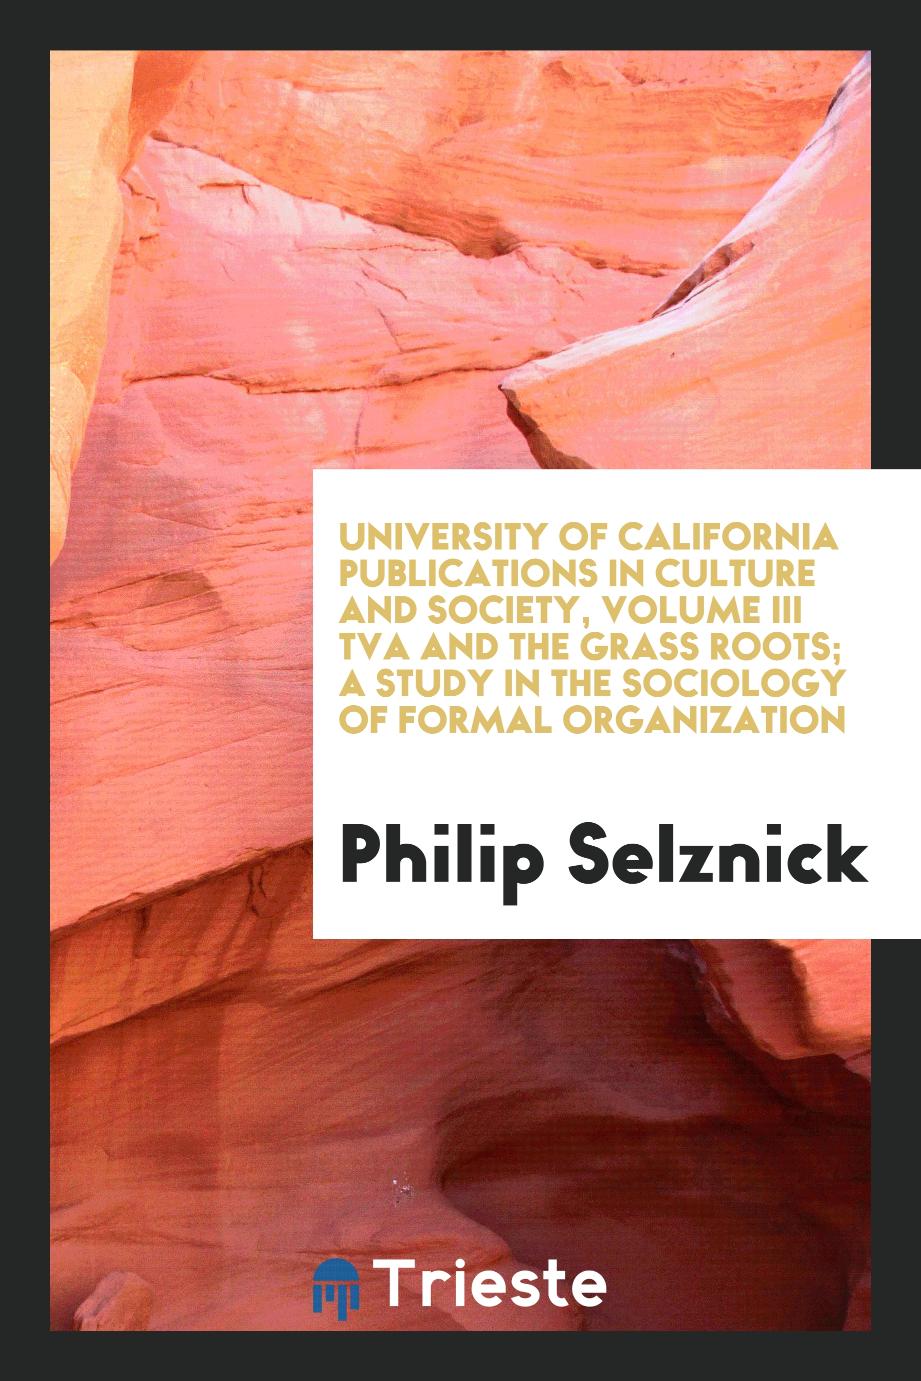 University of California Publications in Culture and Society, Volume III TVA and the grass roots; a study in the sociology of formal organization